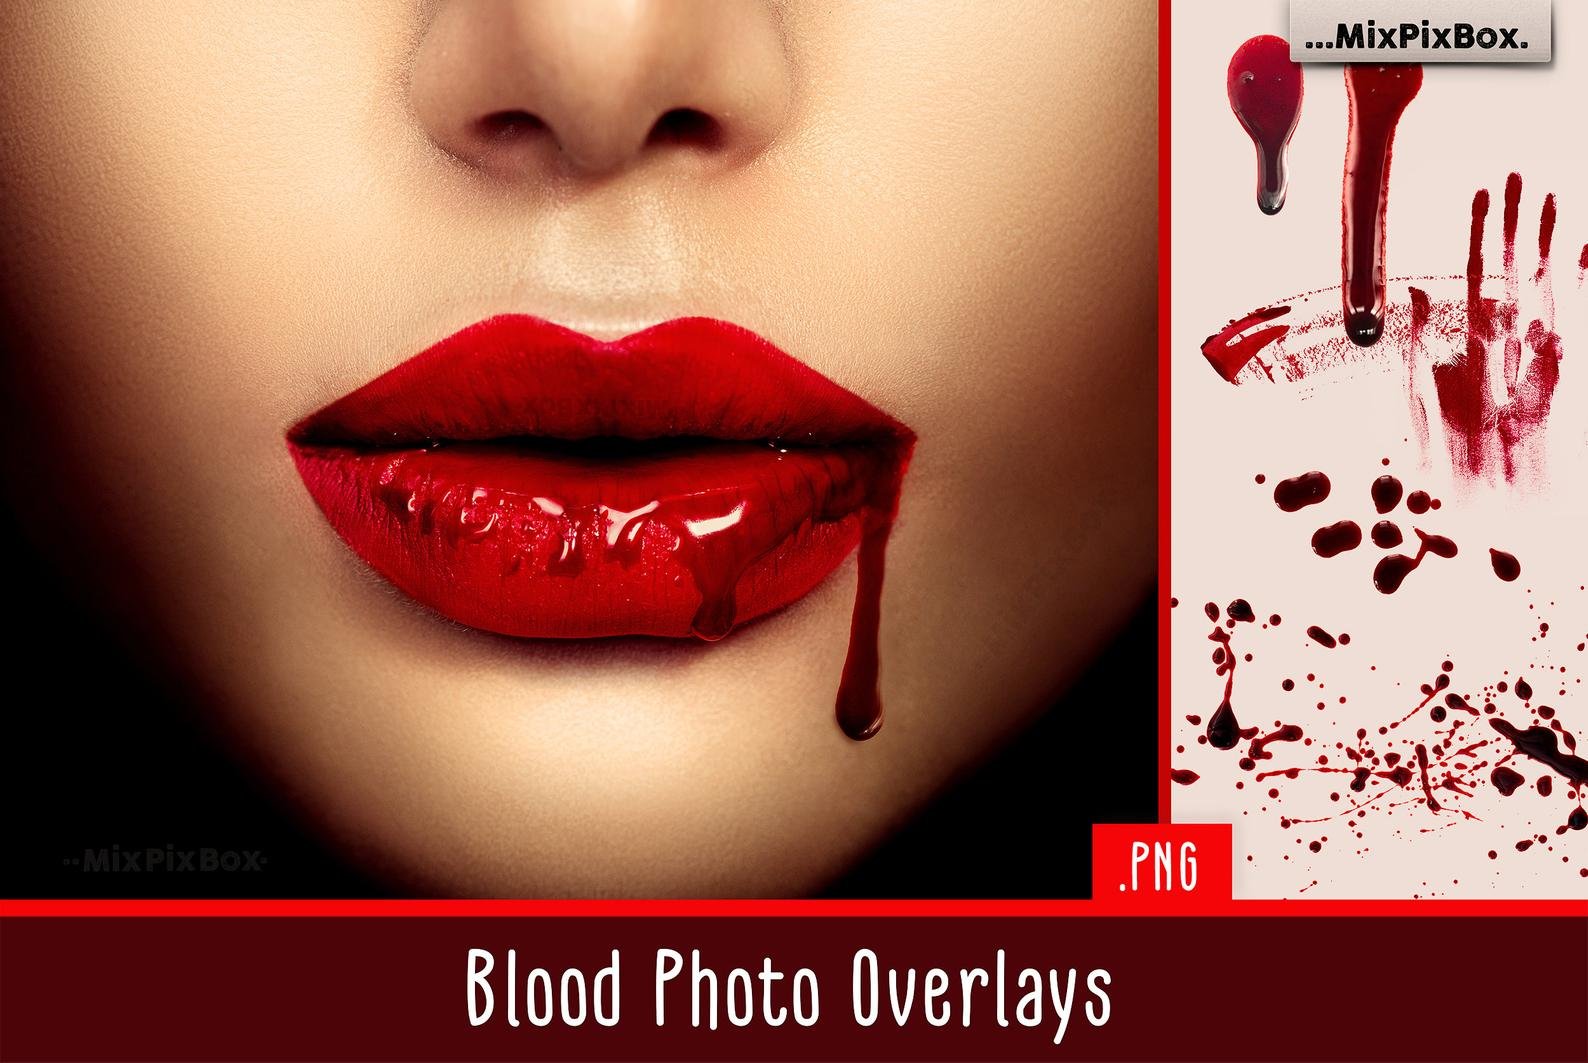 Blood Photo Overlayscover image.